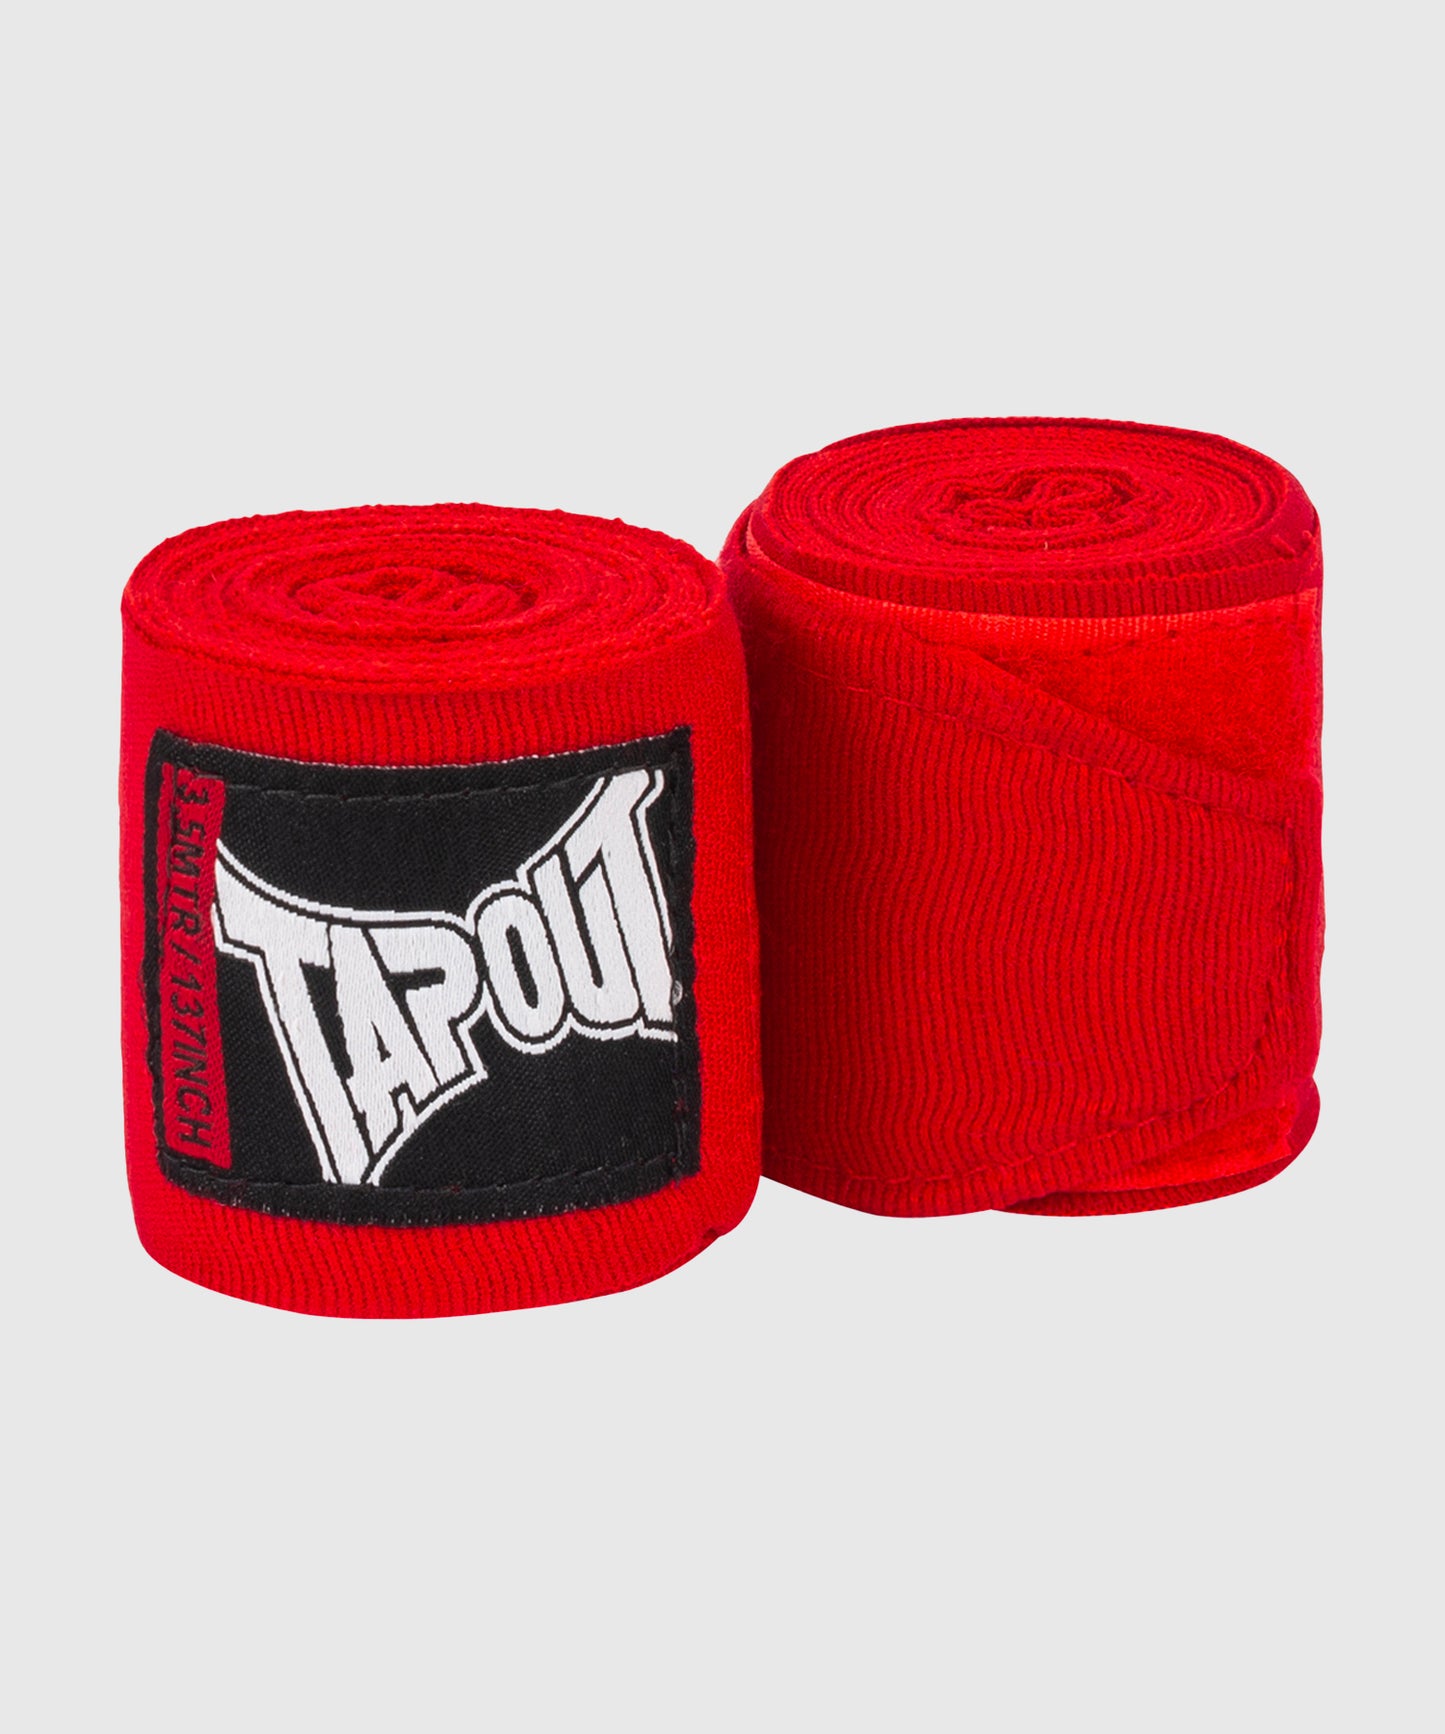 Bandes Tapout Sling - 5m - Rouge